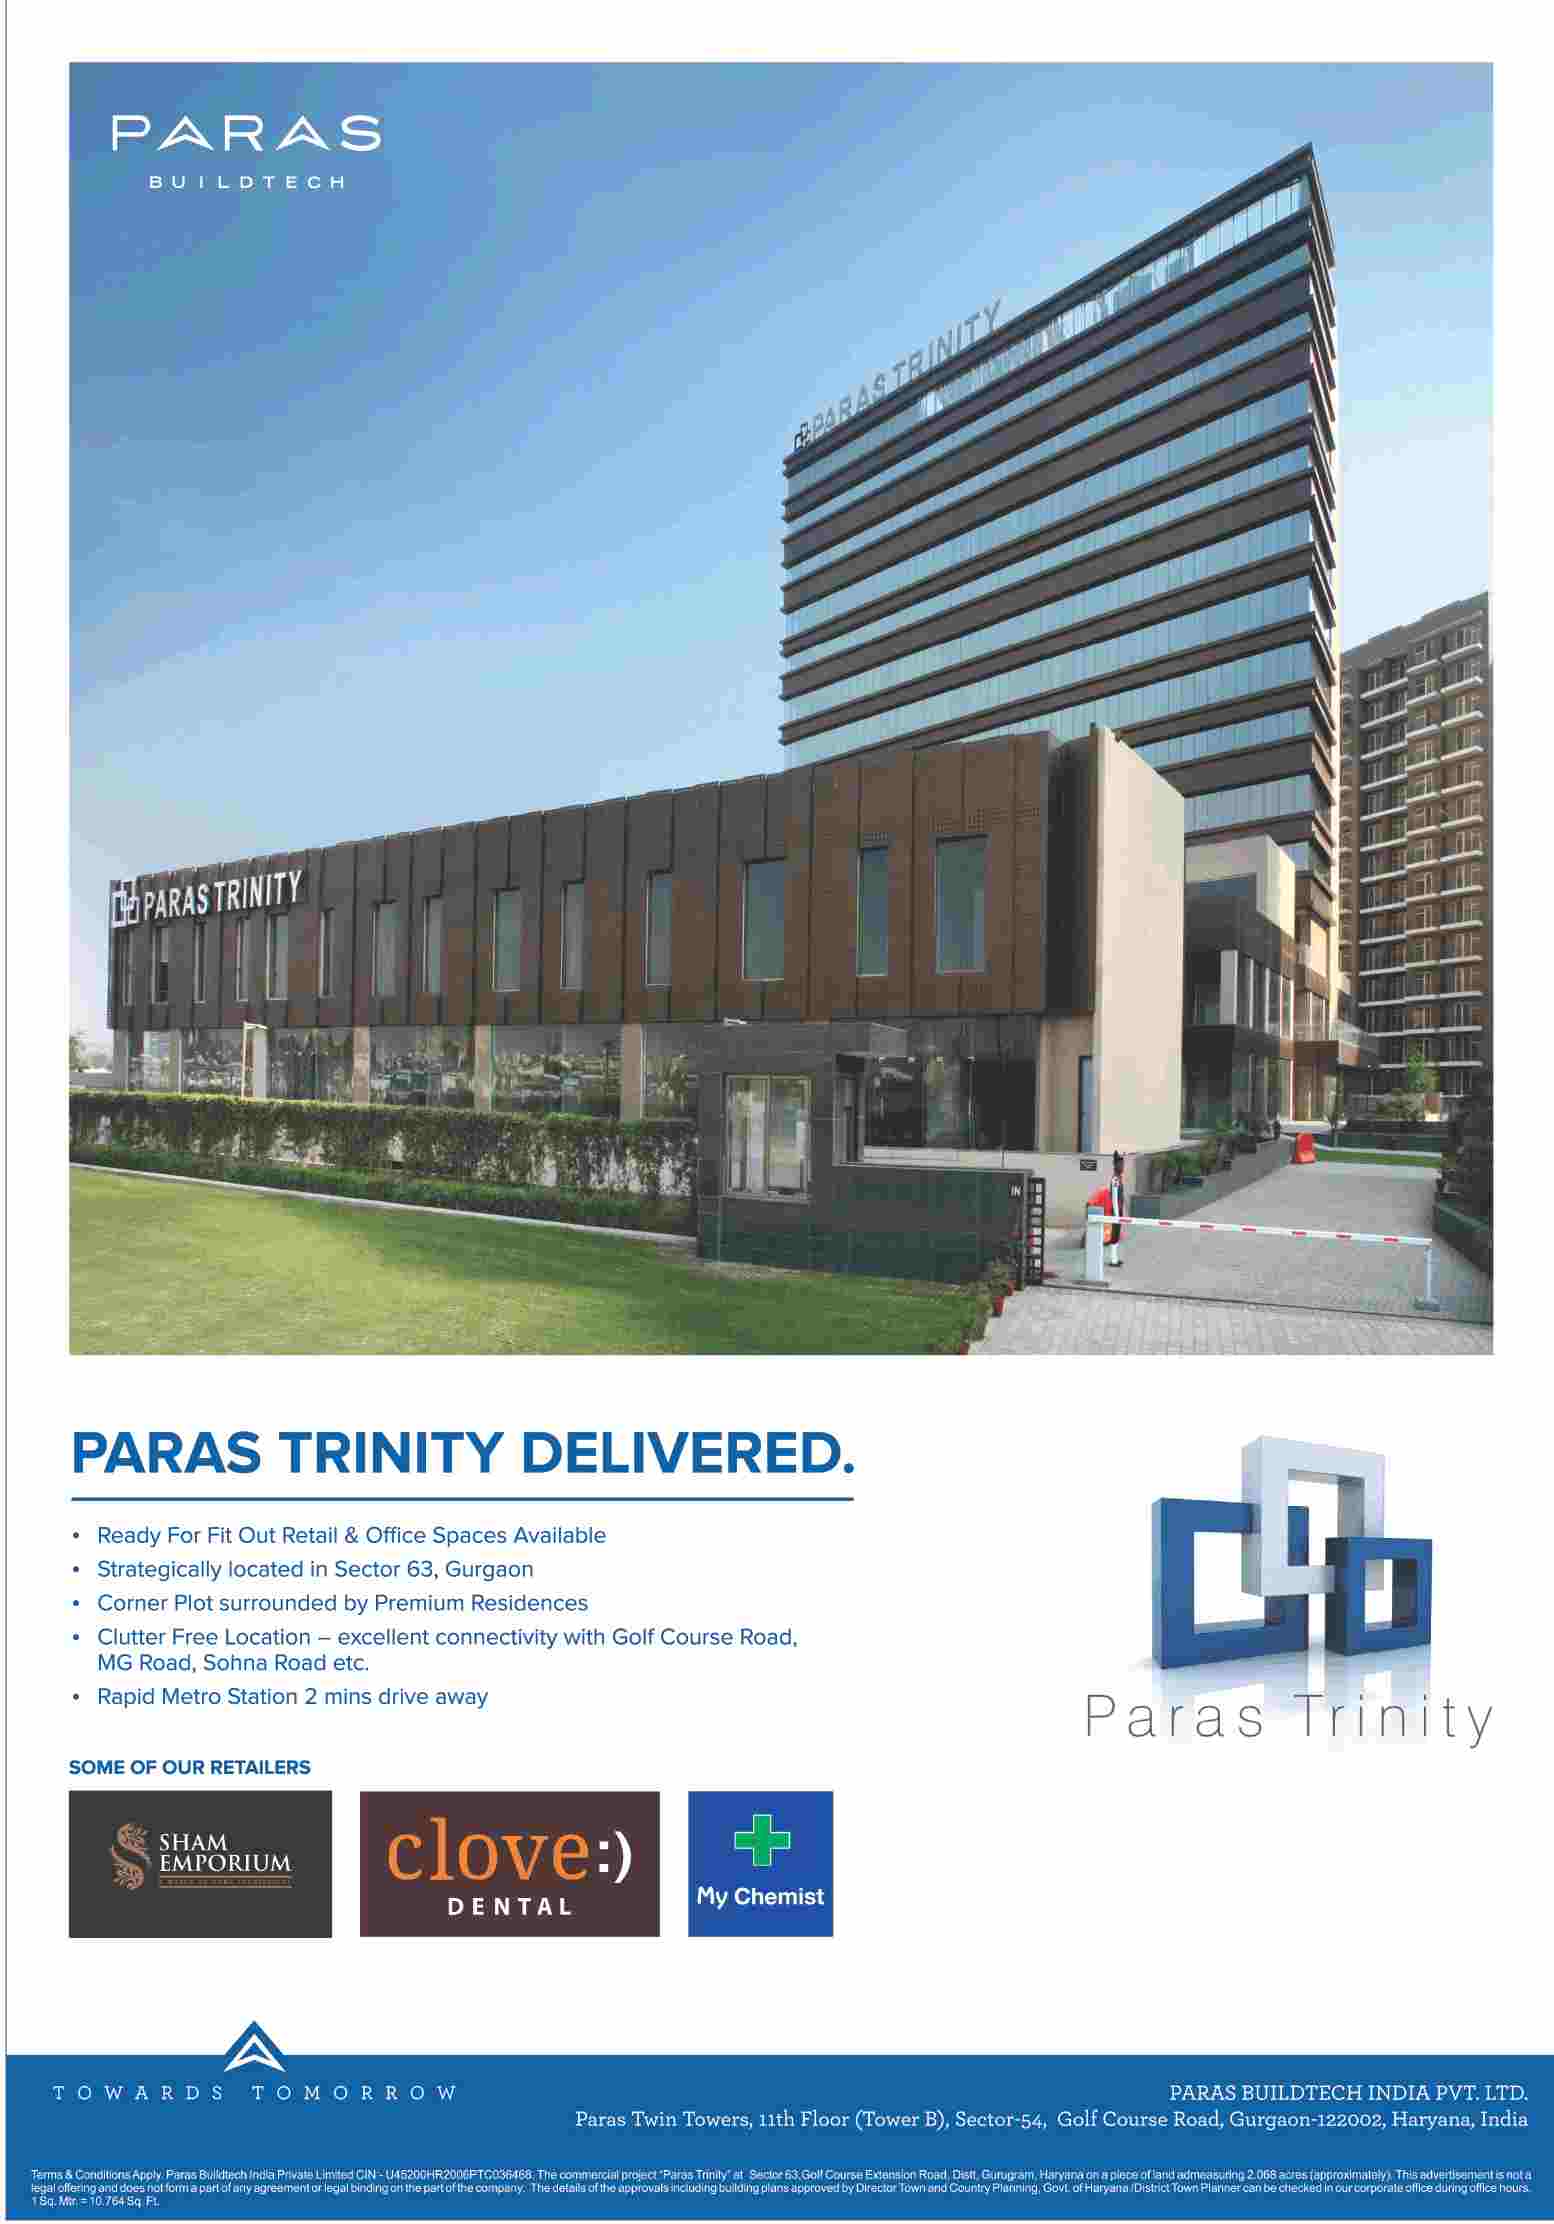 Ready for fit-out retail and office spaces available at Paras Trinity in Gurgaon